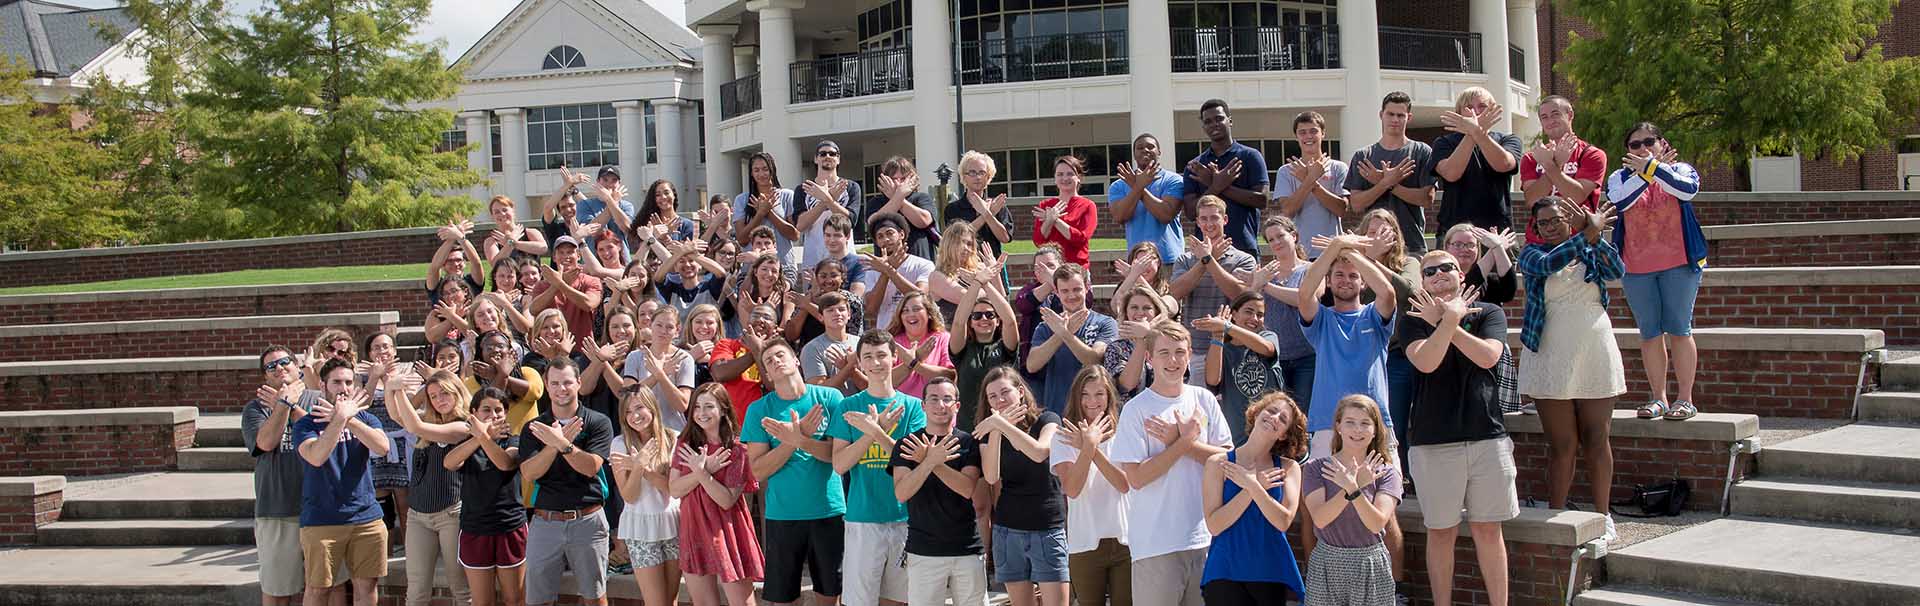 Group of students pose for photo outside of UNCW building